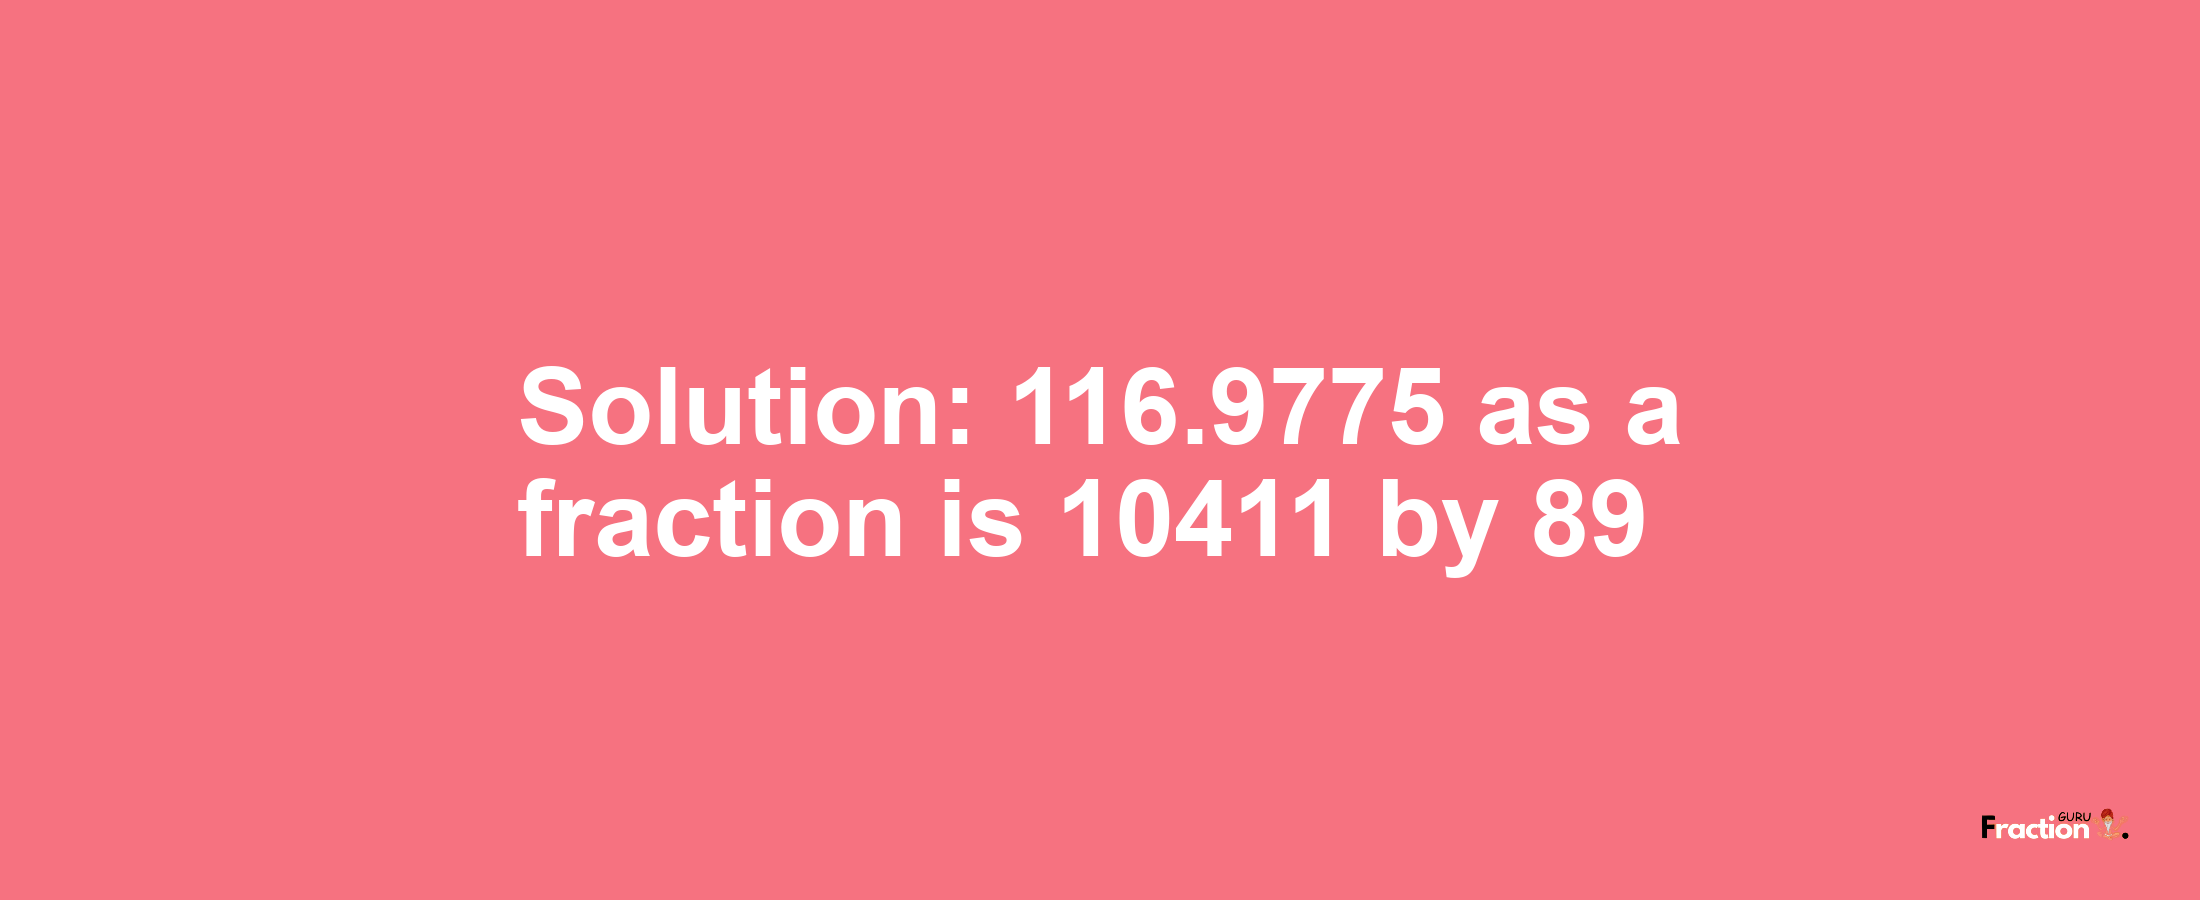 Solution:116.9775 as a fraction is 10411/89